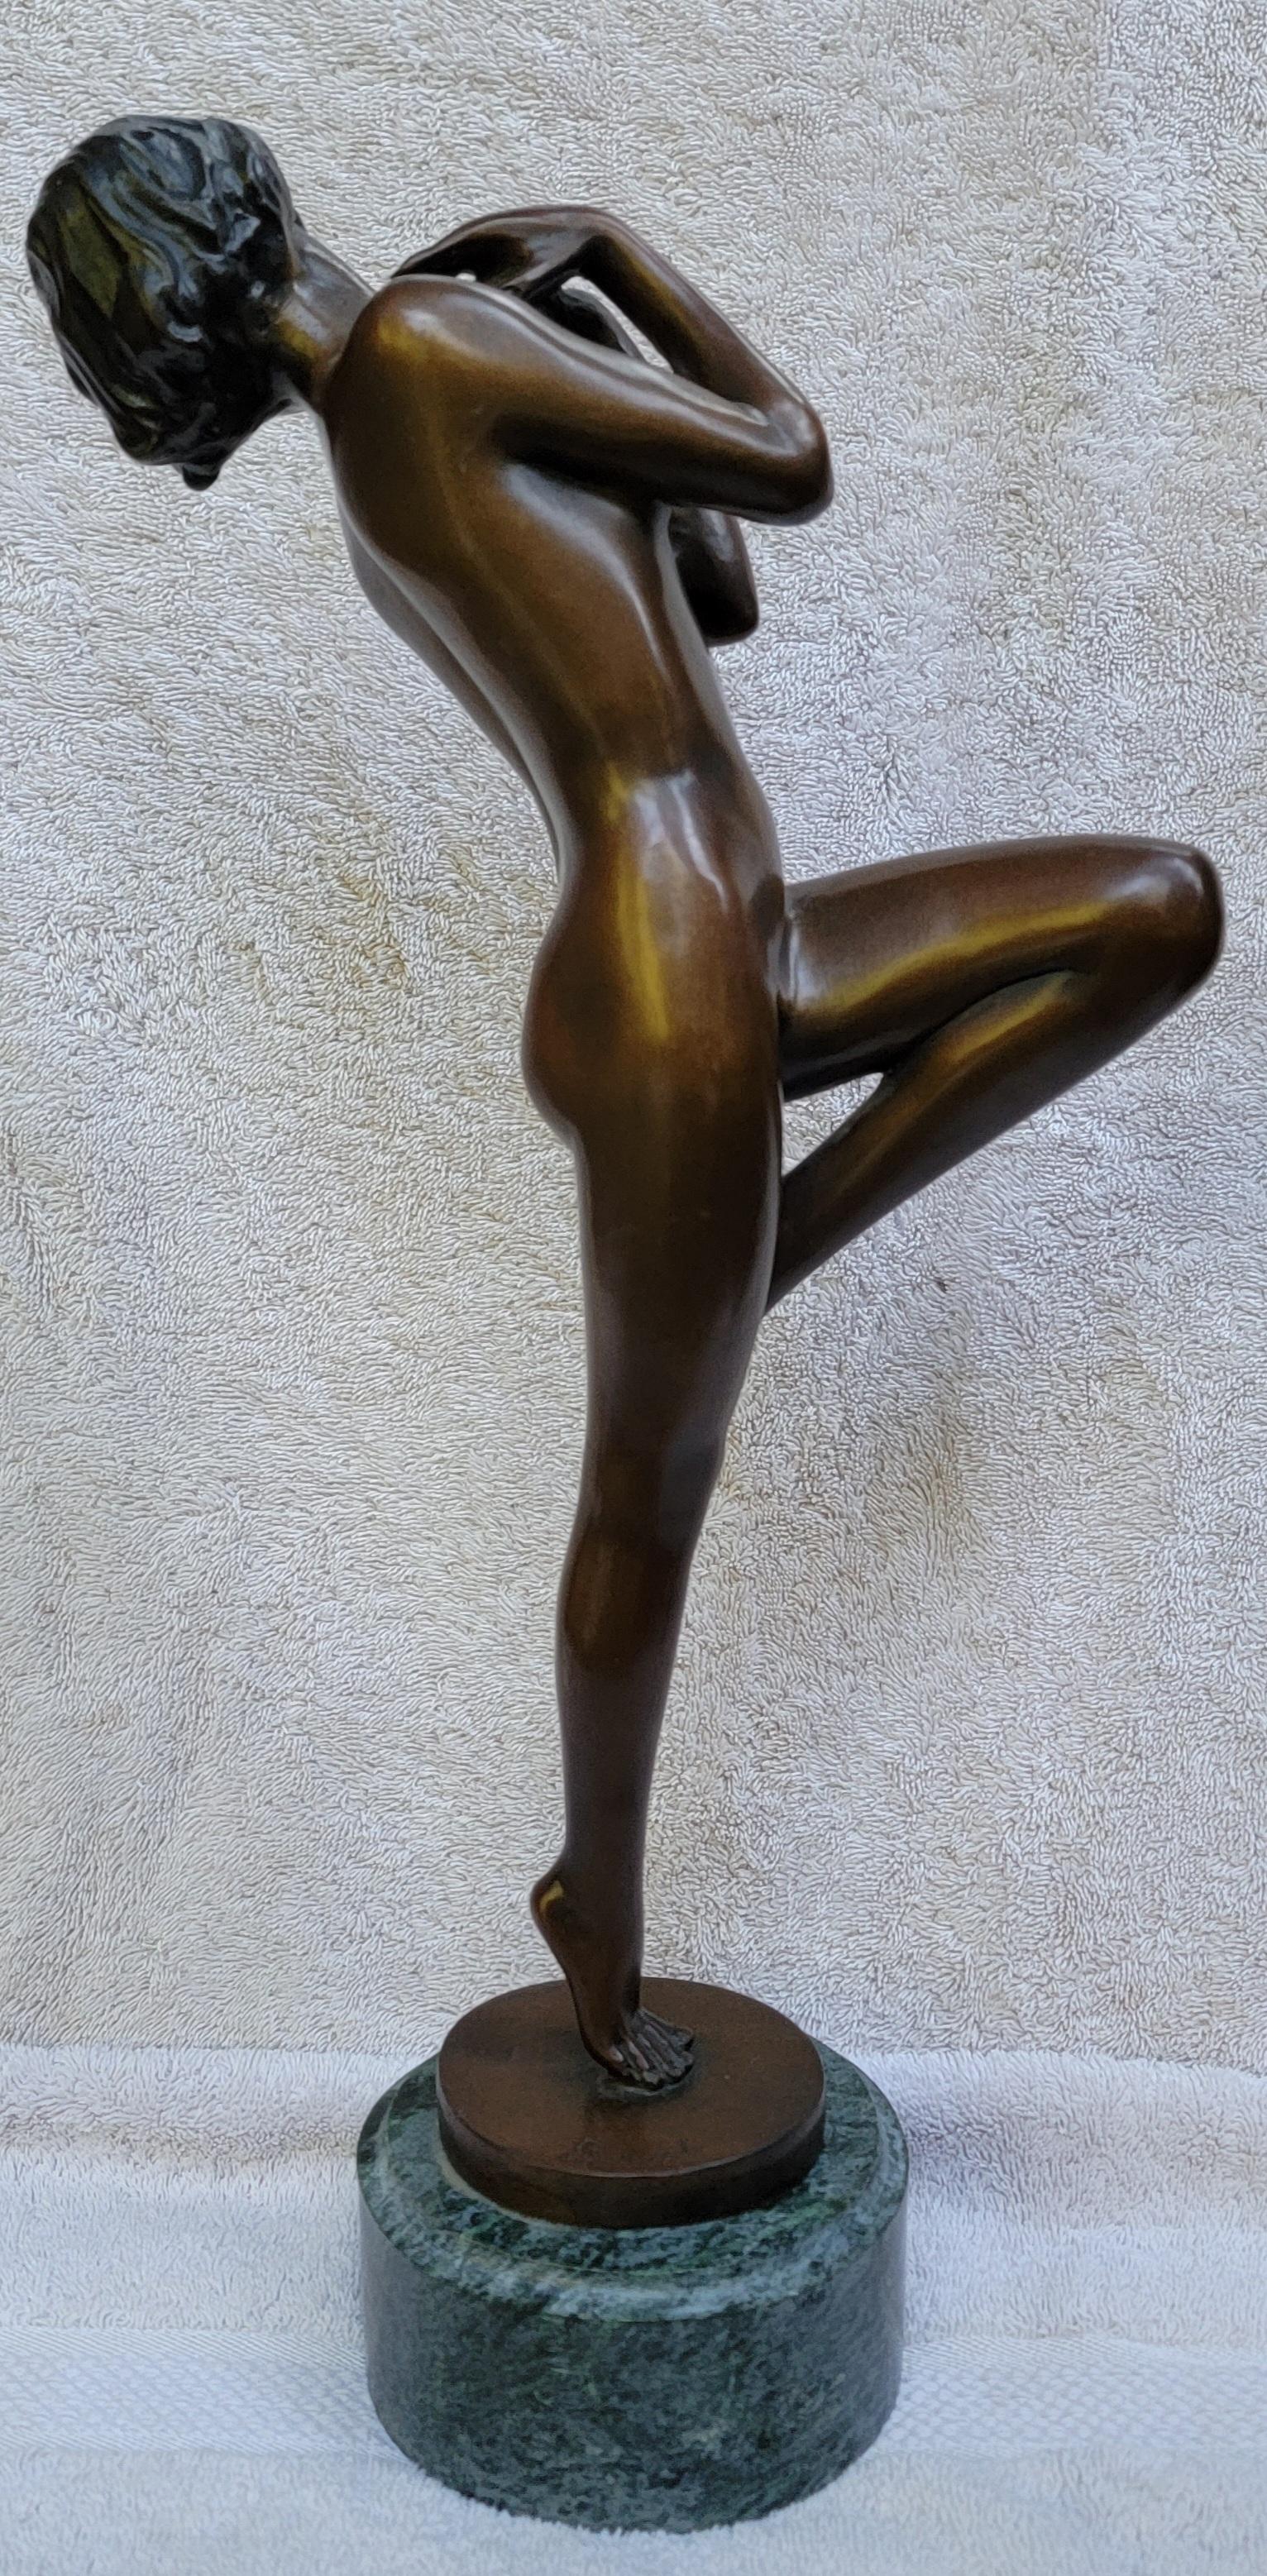 Art Deco bronze sculpture mounted to marble base. Signed Lorenzl at base with Lorenz brass tag on marble. Solid bronze. Posing nude woman standing with one leg raised and hands raised to chest. Medium scale, stands 17.13 inches tall. I believe this